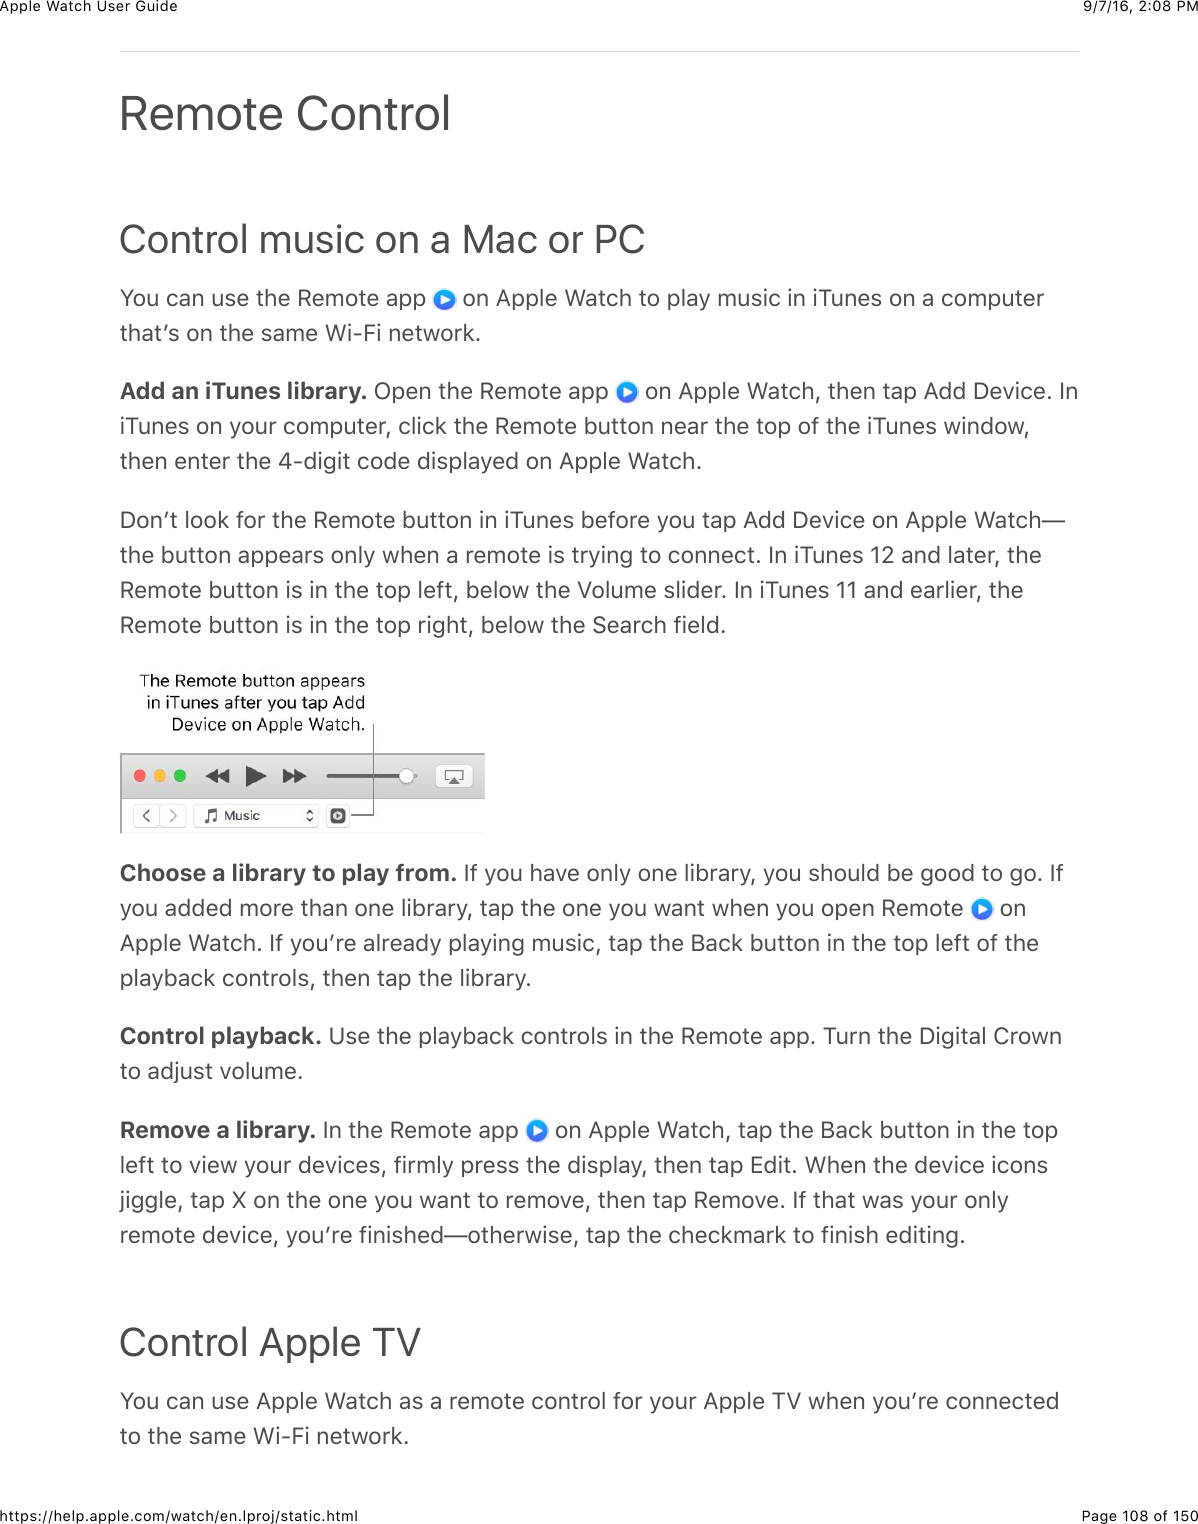 9/7/16, 2)08 PMApple Watch User GuidePage 108 of 150https://help.apple.com/watch/en.lproj/static.htmlControl music on a Mac or PCS#4&amp;(&apos;,&amp;4$%&amp;3)%&amp;H%5#3%&amp;&apos;22&amp; &amp;#,&amp;=22&quot;%&amp;&gt;&apos;3()&amp;3#&amp;2&quot;&apos;/&amp;54$+(&amp;+,&amp;+14,%$&amp;#,&amp;&apos;&amp;(#5243%*3)&apos;3W$&amp;#,&amp;3)%&amp;$&apos;5%&amp;&gt;+?E+&amp;,%37#*8CAdd an iTunes library. L2%,&amp;3)%&amp;H%5#3%&amp;&apos;22&amp; &amp;#,&amp;=22&quot;%&amp;&gt;&apos;3()J&amp;3)%,&amp;3&apos;2&amp;=00&amp;I%.+(%C&amp;Y,+14,%$&amp;#,&amp;/#4*&amp;(#5243%*J&amp;(&quot;+(8&amp;3)%&amp;H%5#3%&amp;B433#,&amp;,%&apos;*&amp;3)%&amp;3#2&amp;#@&amp;3)%&amp;+14,%$&amp;7+,0#7J3)%,&amp;%,3%*&amp;3)%&amp;q?0+-+3&amp;(#0%&amp;0+$2&quot;&apos;/%0&amp;#,&amp;=22&quot;%&amp;&gt;&apos;3()CI#,W3&amp;&quot;##8&amp;@#*&amp;3)%&amp;H%5#3%&amp;B433#,&amp;+,&amp;+14,%$&amp;B%@#*%&amp;/#4&amp;3&apos;2&amp;=00&amp;I%.+(%&amp;#,&amp;=22&quot;%&amp;&gt;&apos;3()T3)%&amp;B433#,&amp;&apos;22%&apos;*$&amp;#,&quot;/&amp;7)%,&amp;&apos;&amp;*%5#3%&amp;+$&amp;3*/+,-&amp;3#&amp;(#,,%(3C&amp;Y,&amp;+14,%$&amp;]Q&amp;&apos;,0&amp;&quot;&apos;3%*J&amp;3)%H%5#3%&amp;B433#,&amp;+$&amp;+,&amp;3)%&amp;3#2&amp;&quot;%@3J&amp;B%&quot;#7&amp;3)%&amp;_#&quot;45%&amp;$&quot;+0%*C&amp;Y,&amp;+14,%$&amp;]]&amp;&apos;,0&amp;%&apos;*&quot;+%*J&amp;3)%H%5#3%&amp;B433#,&amp;+$&amp;+,&amp;3)%&amp;3#2&amp;*+-)3J&amp;B%&quot;#7&amp;3)%&amp;6%&apos;*()&amp;@+%&quot;0CChoose a library to play from. Y@&amp;/#4&amp;)&apos;.%&amp;#,&quot;/&amp;#,%&amp;&quot;+B*&apos;*/J&amp;/#4&amp;$)#4&quot;0&amp;B%&amp;-##0&amp;3#&amp;-#C&amp;Y@/#4&amp;&apos;00%0&amp;5#*%&amp;3)&apos;,&amp;#,%&amp;&quot;+B*&apos;*/J&amp;3&apos;2&amp;3)%&amp;#,%&amp;/#4&amp;7&apos;,3&amp;7)%,&amp;/#4&amp;#2%,&amp;H%5#3%&amp; &amp;#,=22&quot;%&amp;&gt;&apos;3()C&amp;Y@&amp;/#4W*%&amp;&apos;&quot;*%&apos;0/&amp;2&quot;&apos;/+,-&amp;54$+(J&amp;3&apos;2&amp;3)%&amp;;&apos;(8&amp;B433#,&amp;+,&amp;3)%&amp;3#2&amp;&quot;%@3&amp;#@&amp;3)%2&quot;&apos;/B&apos;(8&amp;(#,3*#&quot;$J&amp;3)%,&amp;3&apos;2&amp;3)%&amp;&quot;+B*&apos;*/CControl playback. K$%&amp;3)%&amp;2&quot;&apos;/B&apos;(8&amp;(#,3*#&quot;$&amp;+,&amp;3)%&amp;H%5#3%&amp;&apos;22C&amp;14*,&amp;3)%&amp;I+-+3&apos;&quot;&amp;!*#7,3#&amp;&apos;0O4$3&amp;.#&quot;45%CRemove a library. Y,&amp;3)%&amp;H%5#3%&amp;&apos;22&amp; &amp;#,&amp;=22&quot;%&amp;&gt;&apos;3()J&amp;3&apos;2&amp;3)%&amp;;&apos;(8&amp;B433#,&amp;+,&amp;3)%&amp;3#2&quot;%@3&amp;3#&amp;.+%7&amp;/#4*&amp;0%.+(%$J&amp;@+*5&quot;/&amp;2*%$$&amp;3)%&amp;0+$2&quot;&apos;/J&amp;3)%,&amp;3&apos;2&amp;Z0+3C&amp;&gt;)%,&amp;3)%&amp;0%.+(%&amp;+(#,$O+--&quot;%J&amp;3&apos;2&amp;i&amp;#,&amp;3)%&amp;#,%&amp;/#4&amp;7&apos;,3&amp;3#&amp;*%5#.%J&amp;3)%,&amp;3&apos;2&amp;H%5#.%C&amp;Y@&amp;3)&apos;3&amp;7&apos;$&amp;/#4*&amp;#,&quot;/*%5#3%&amp;0%.+(%J&amp;/#4W*%&amp;@+,+$)%0T#3)%*7+$%J&amp;3&apos;2&amp;3)%&amp;()%(85&apos;*8&amp;3#&amp;@+,+$)&amp;%0+3+,-CControl Apple TVS#4&amp;(&apos;,&amp;4$%&amp;=22&quot;%&amp;&gt;&apos;3()&amp;&apos;$&amp;&apos;&amp;*%5#3%&amp;(#,3*#&quot;&amp;@#*&amp;/#4*&amp;=22&quot;%&amp;1_&amp;7)%,&amp;/#4W*%&amp;(#,,%(3%03#&amp;3)%&amp;$&apos;5%&amp;&gt;+?E+&amp;,%37#*8CRemote Control